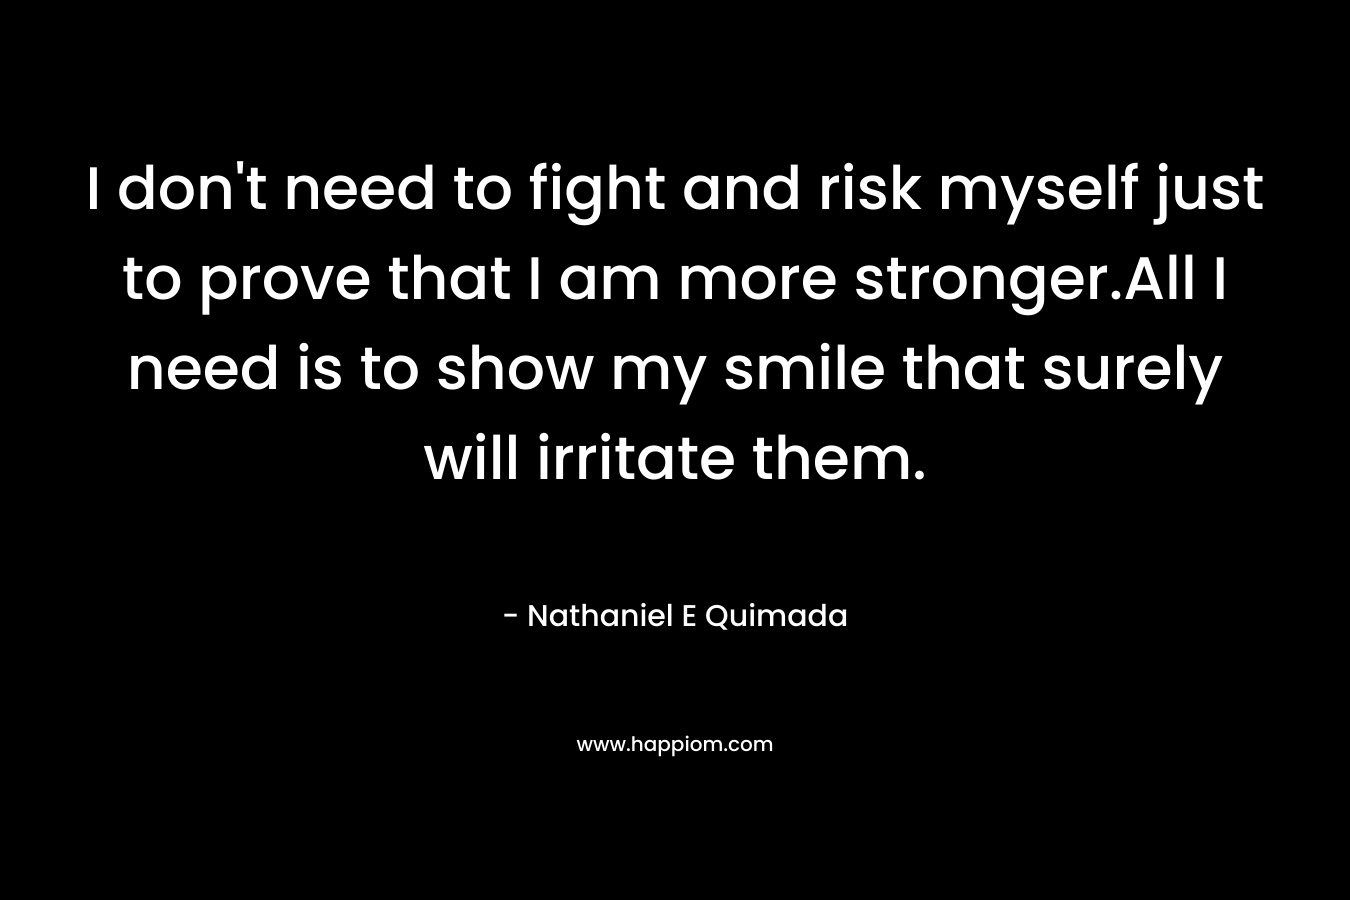 I don’t need to fight and risk myself just to prove that I am more stronger.All I need is to show my smile that surely will irritate them. – Nathaniel E Quimada